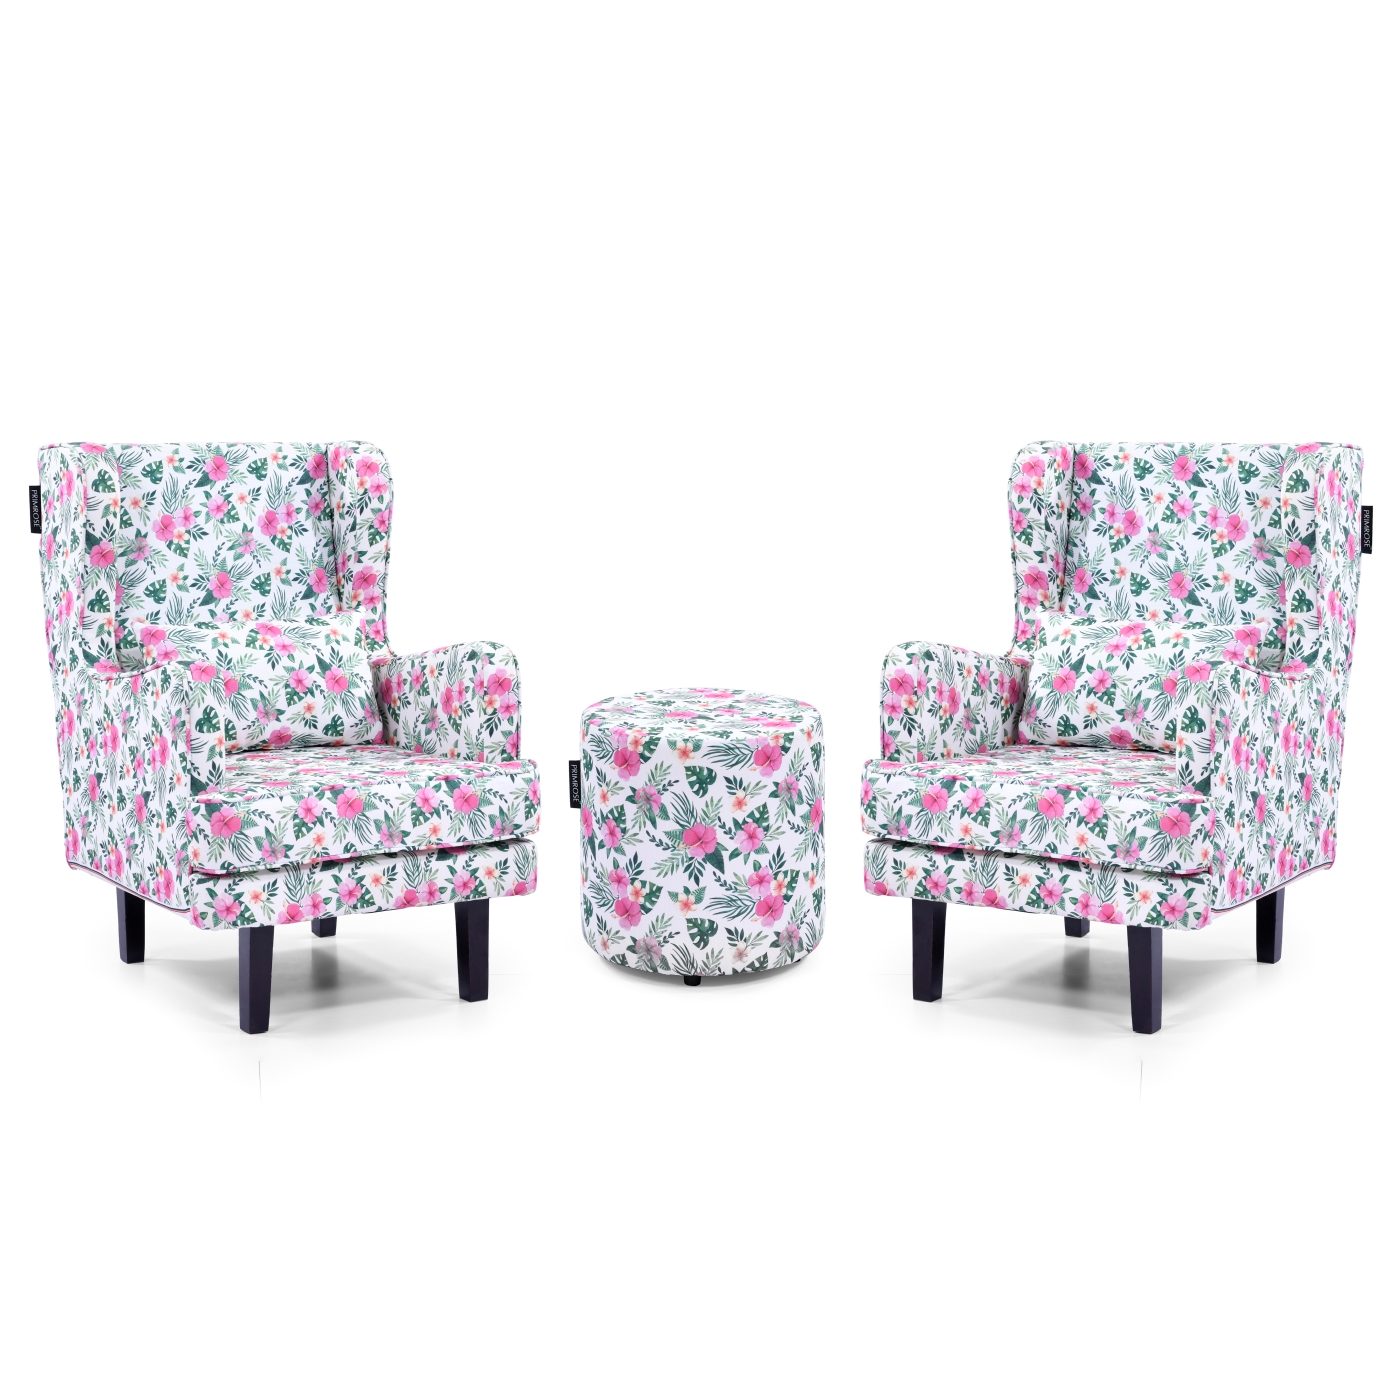 PRIMROSE Hibiscus Floral Digital Printed Faux Linen Fabric High Back Wing Chair Combo (2 Chair+1 Ottoman) - Pink, Green